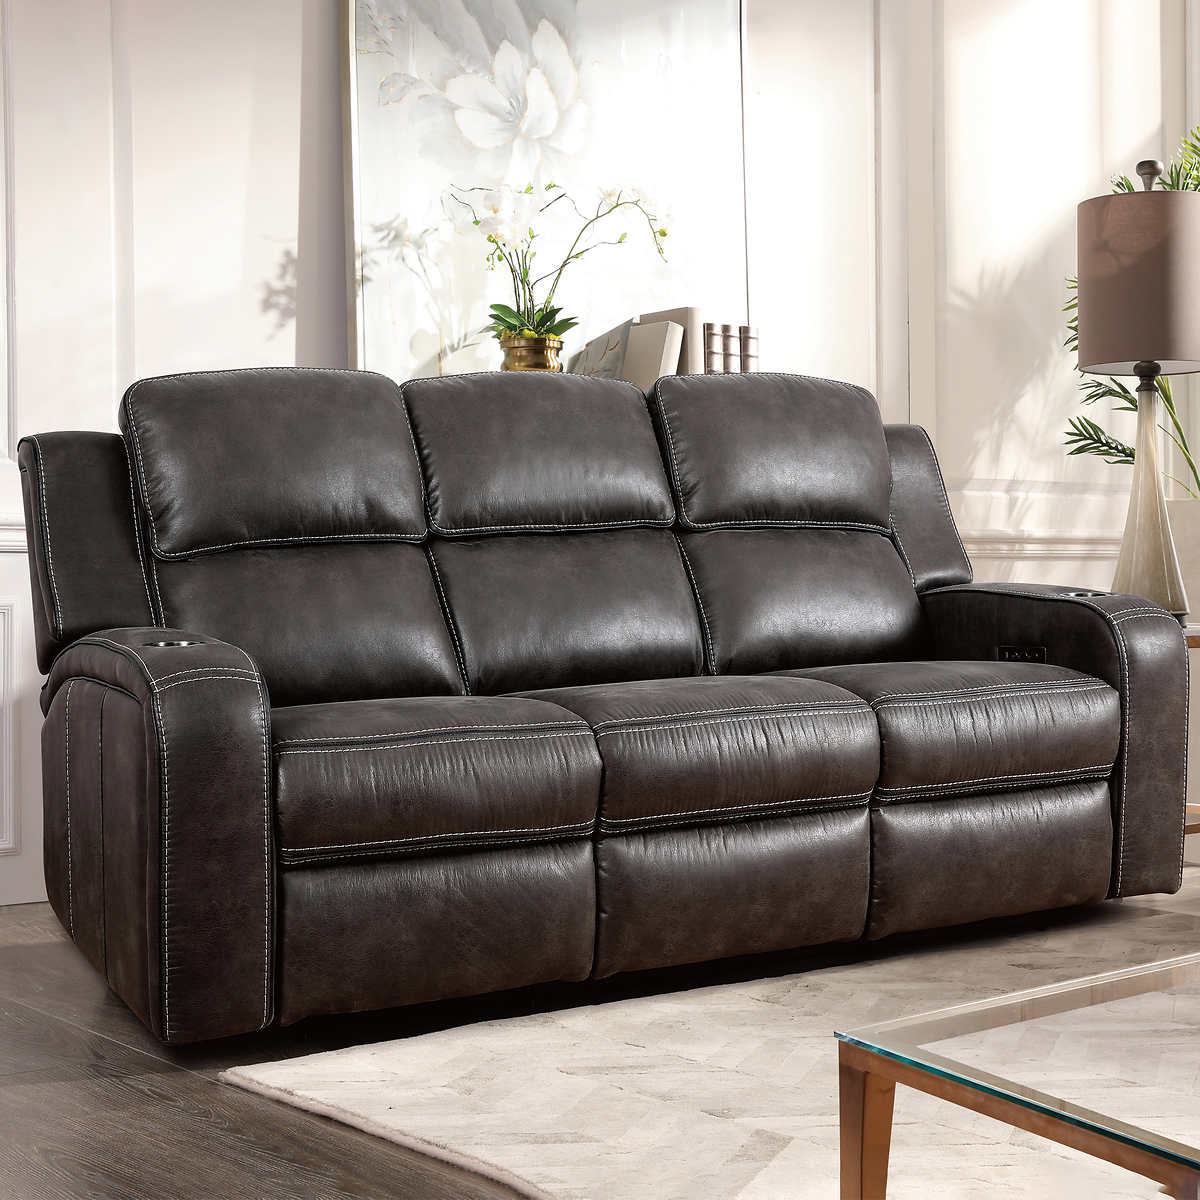 Matteus Fabric Power Reclining Sofa, How To Cover A Leather Recliner Sofa With Fabric